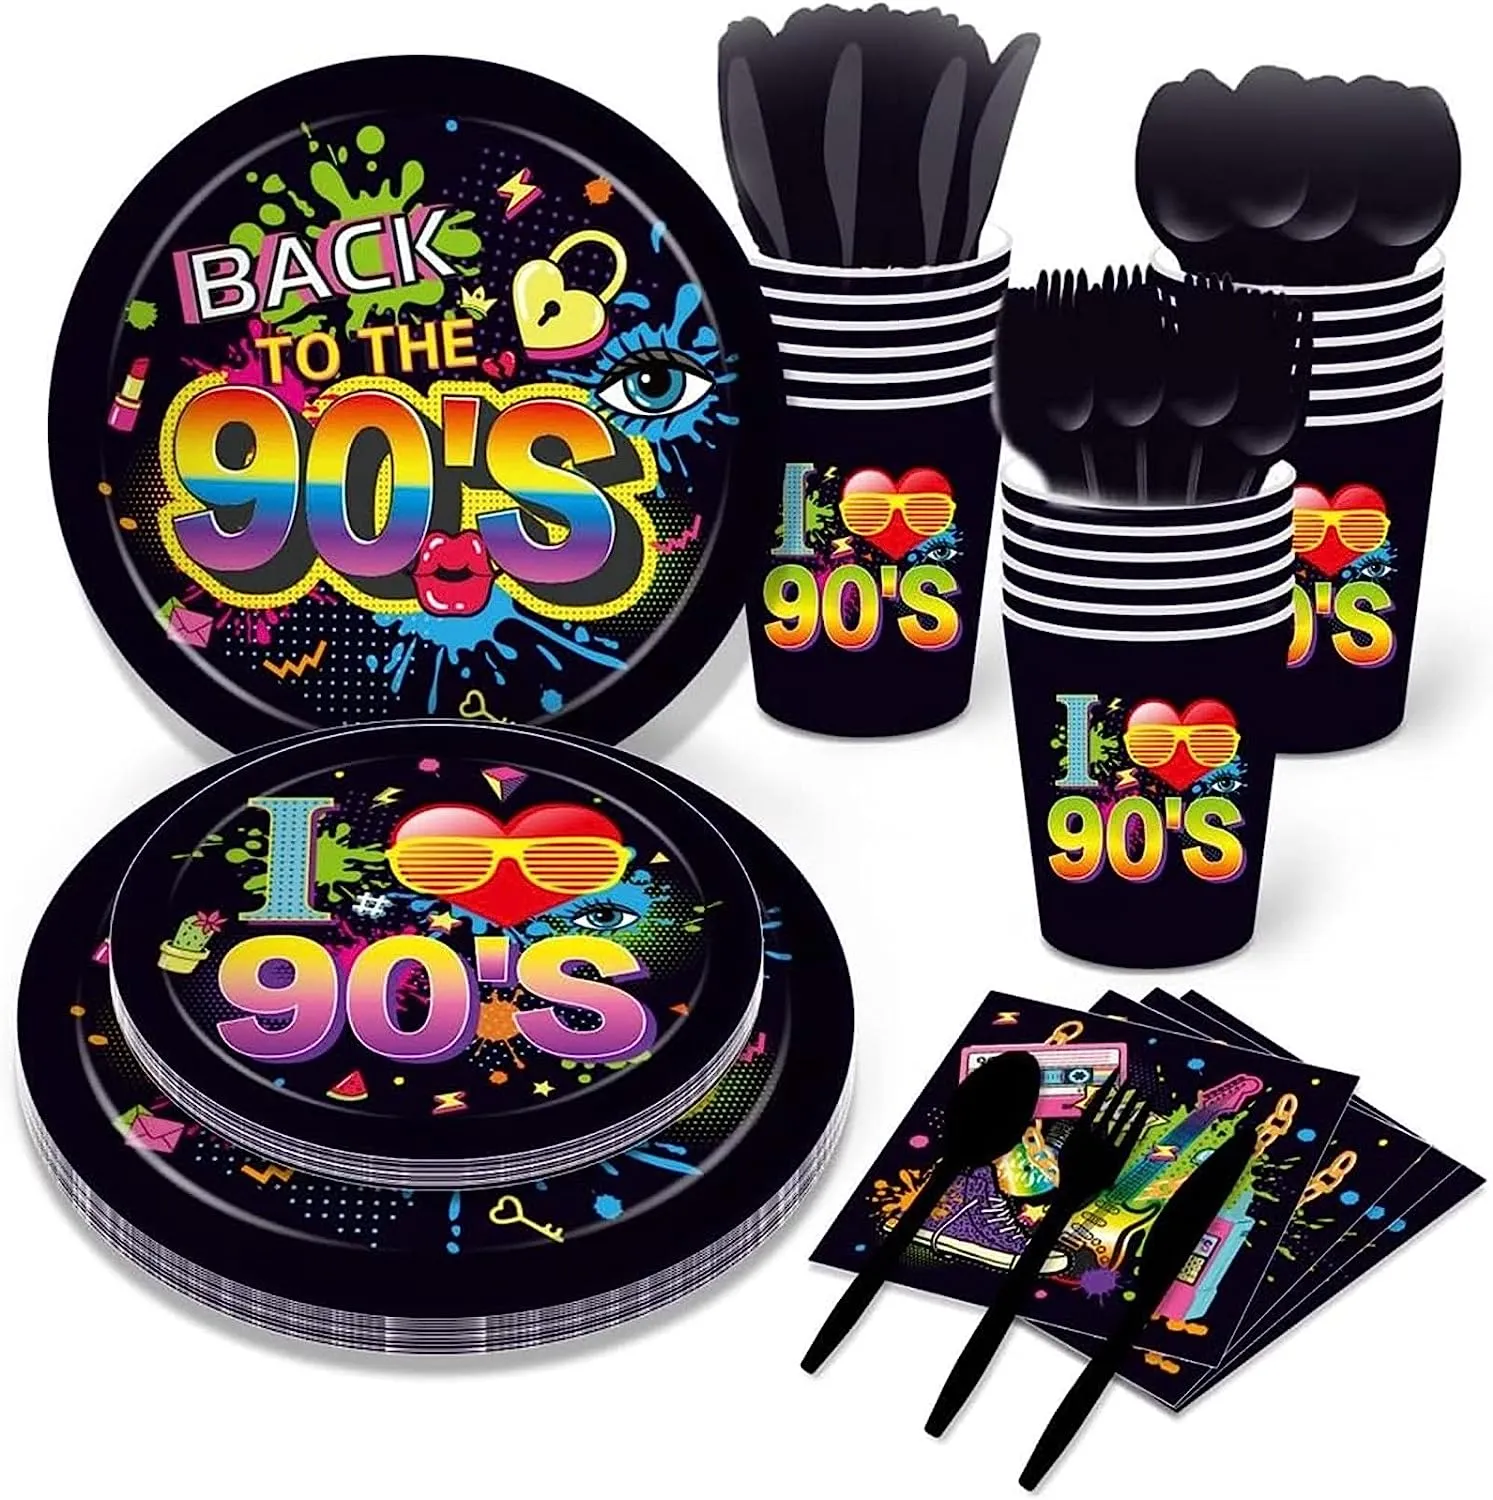 90s Birthday Party Supplies Paper Plates Set Post Tape Audio Plates Skating Tissue Theme Cup Dinnerware Party Hip Hop Cutlery Kits Serves 8 Guests Napkins 68PCS